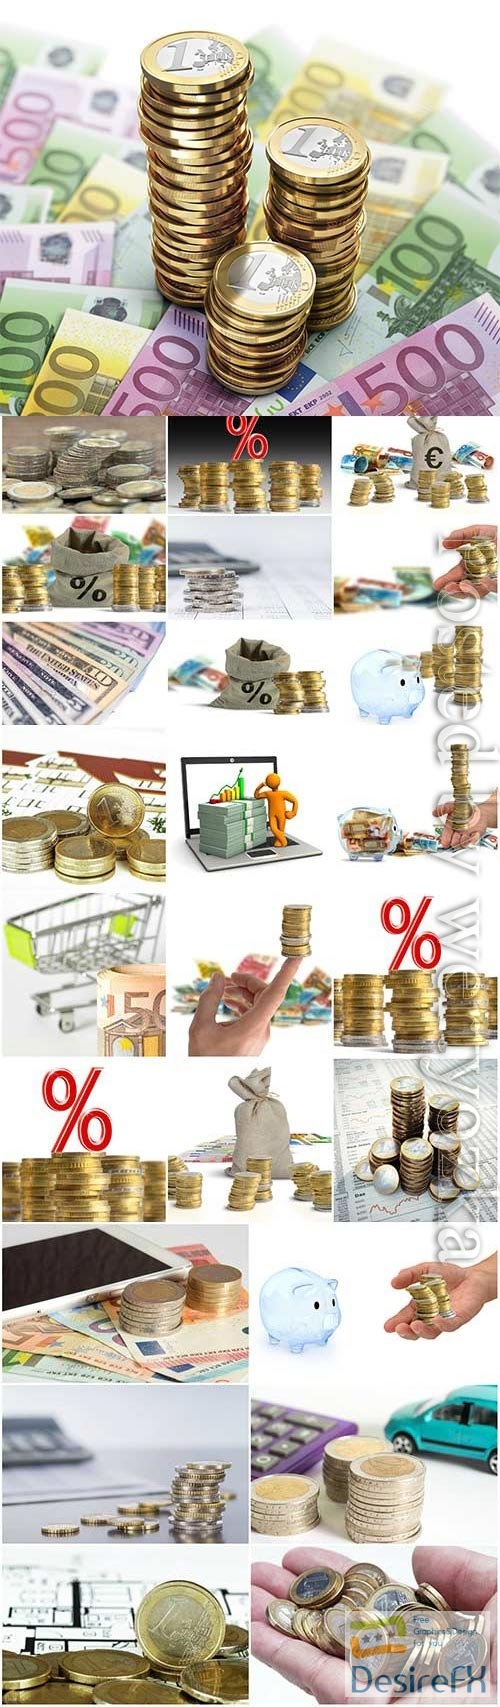 Coins and various banknotes stock photo